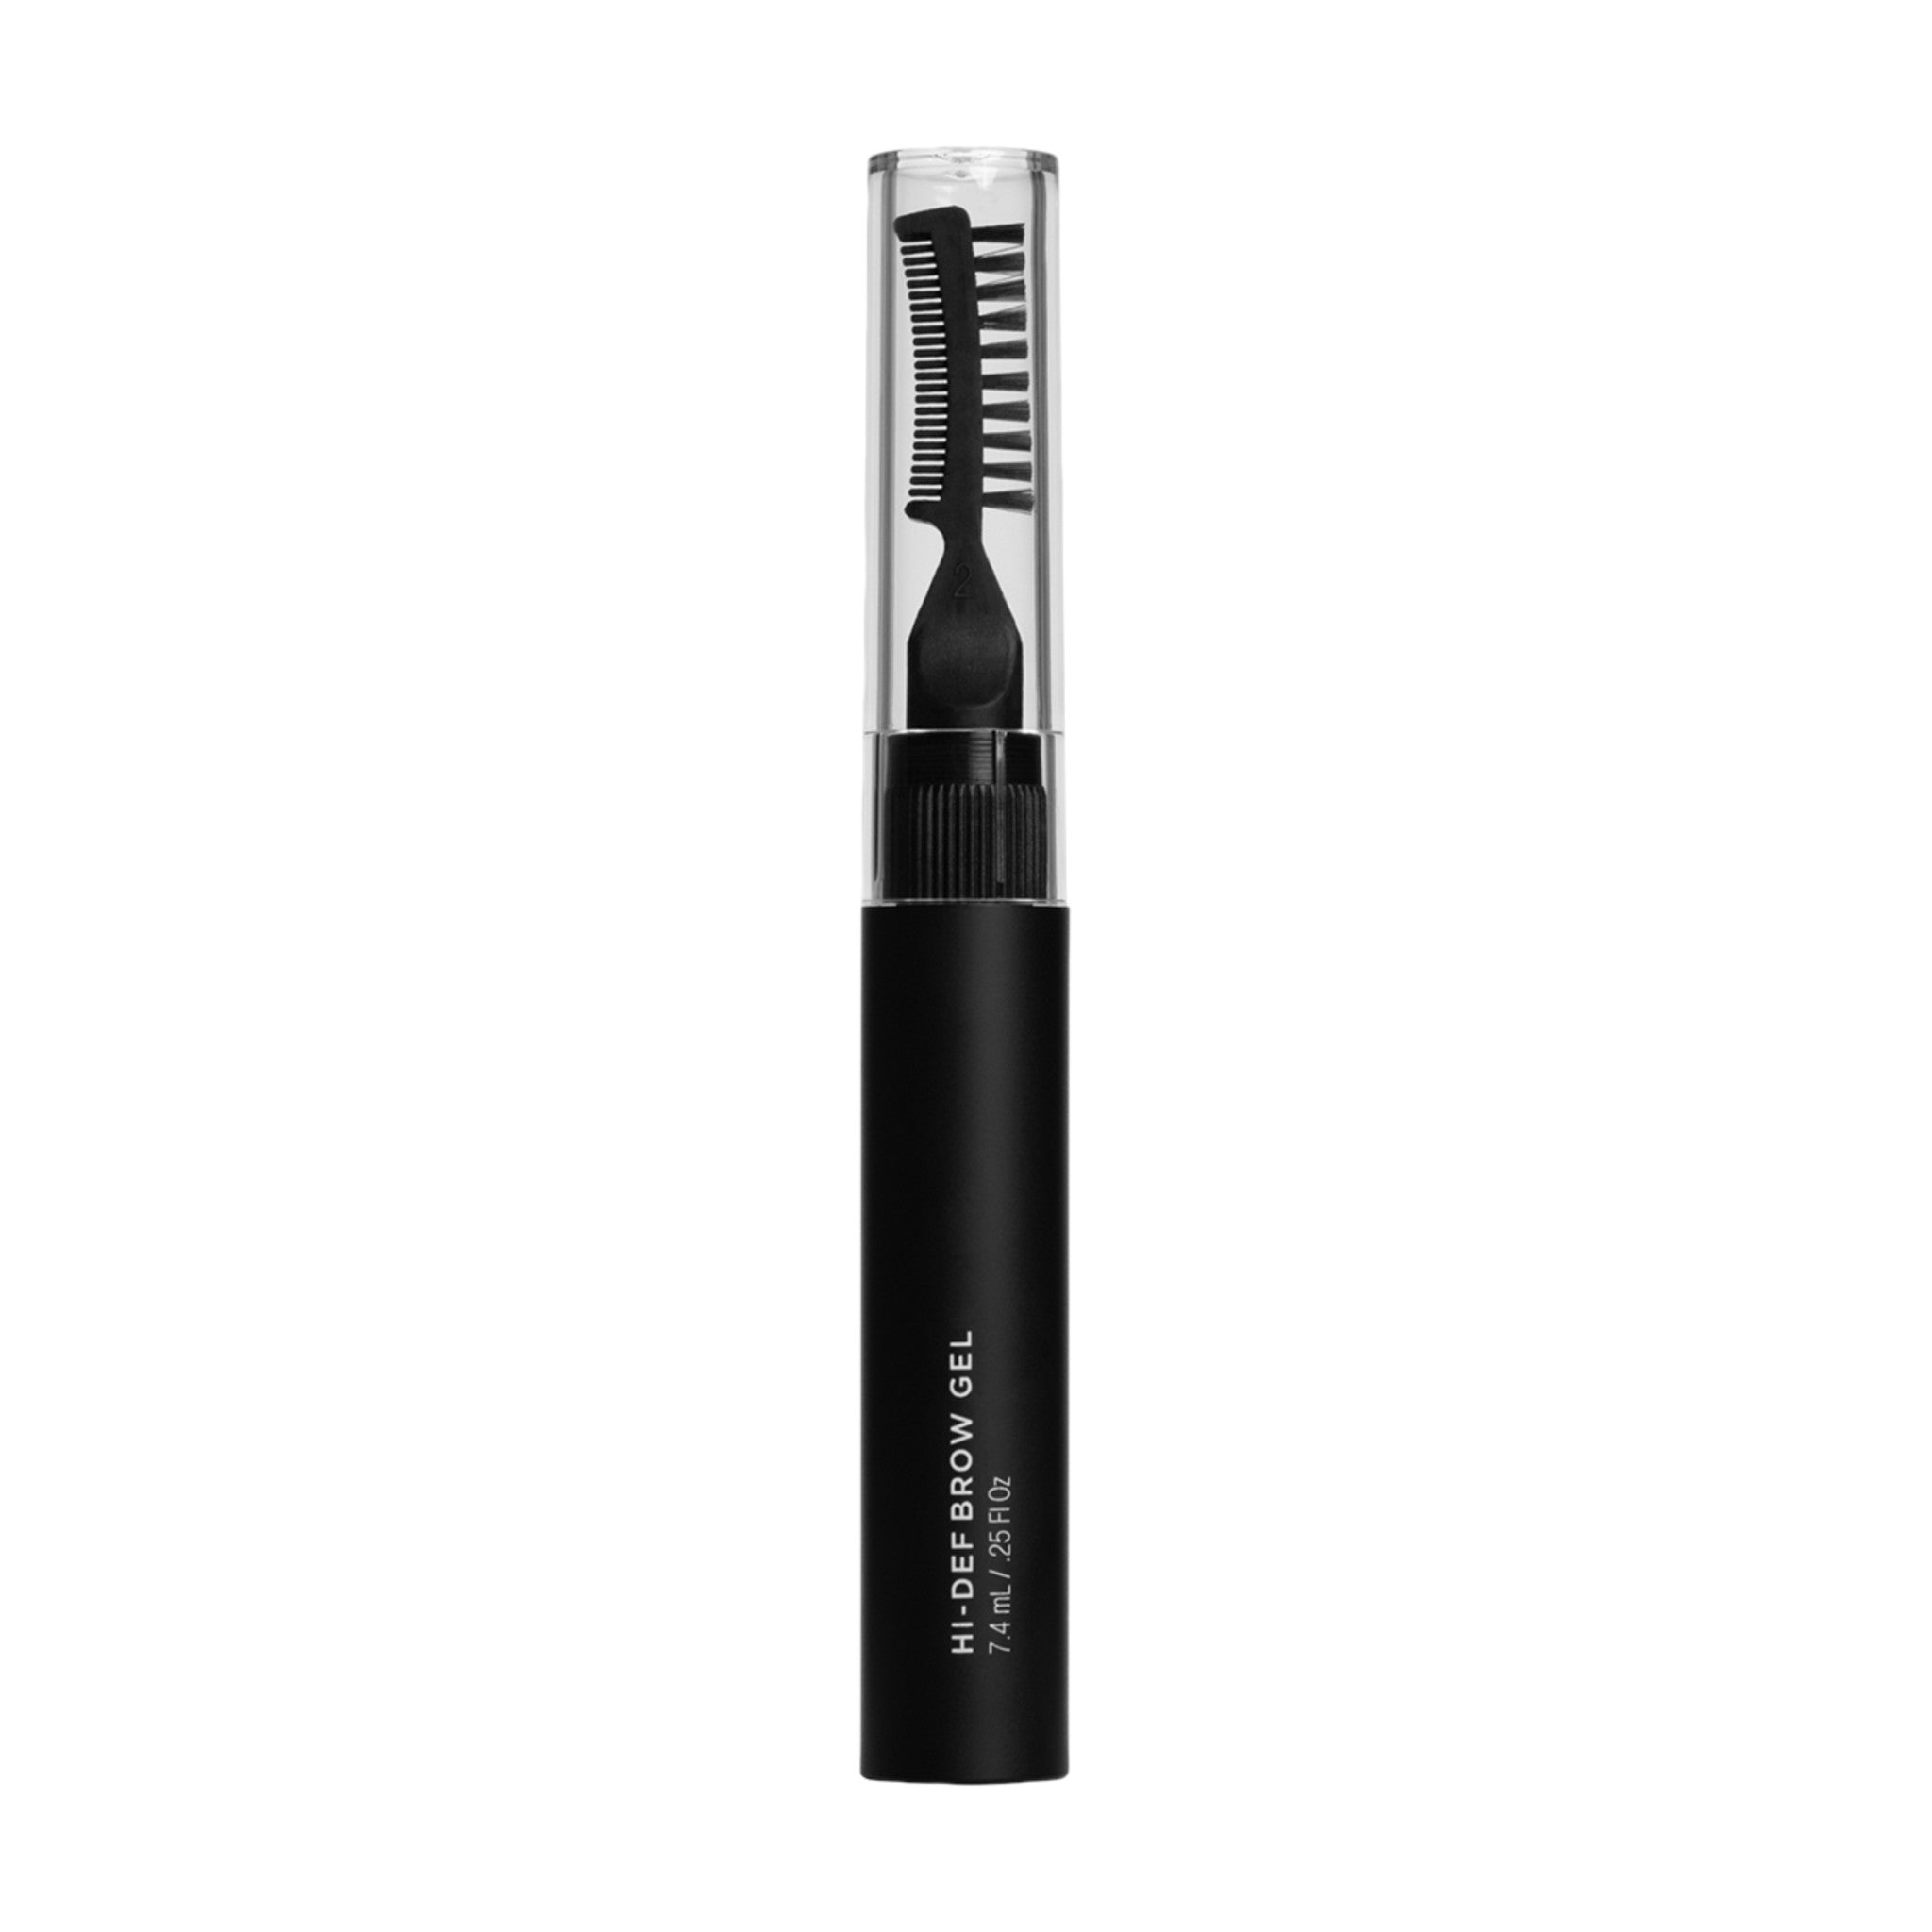 RevitaLash Hi Def Brow Gel Color/Shade variant: Soft Brown main image. This product is in the color brown